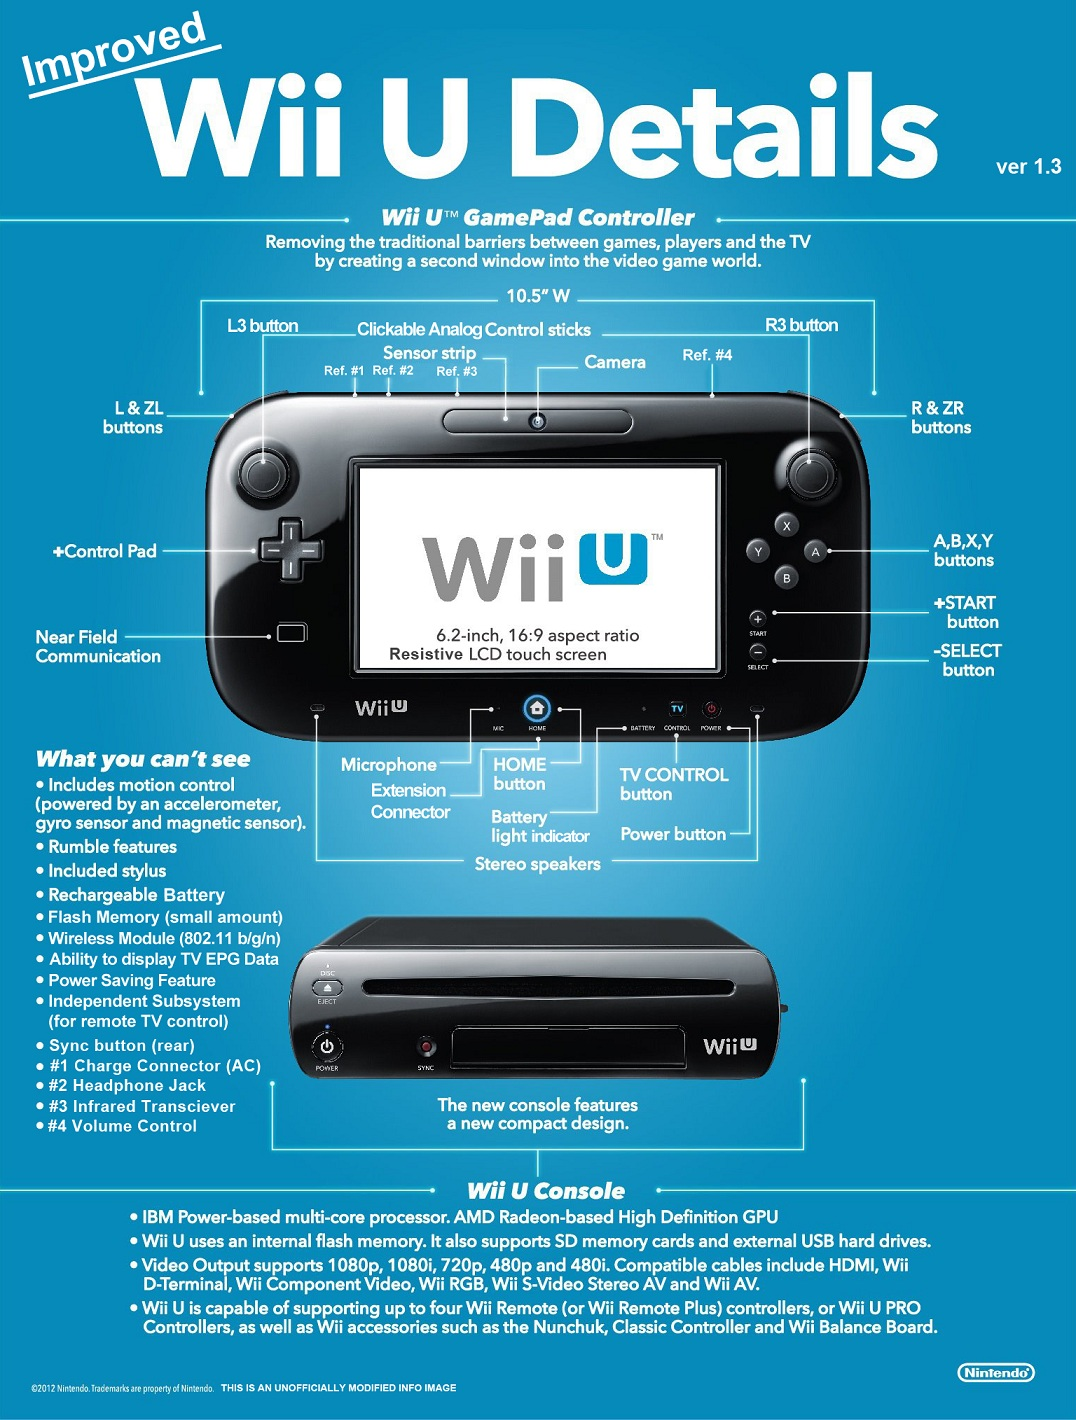 Hula hop Lære udenad stamtavle Everything you need know about the Wii U | Ars Technica